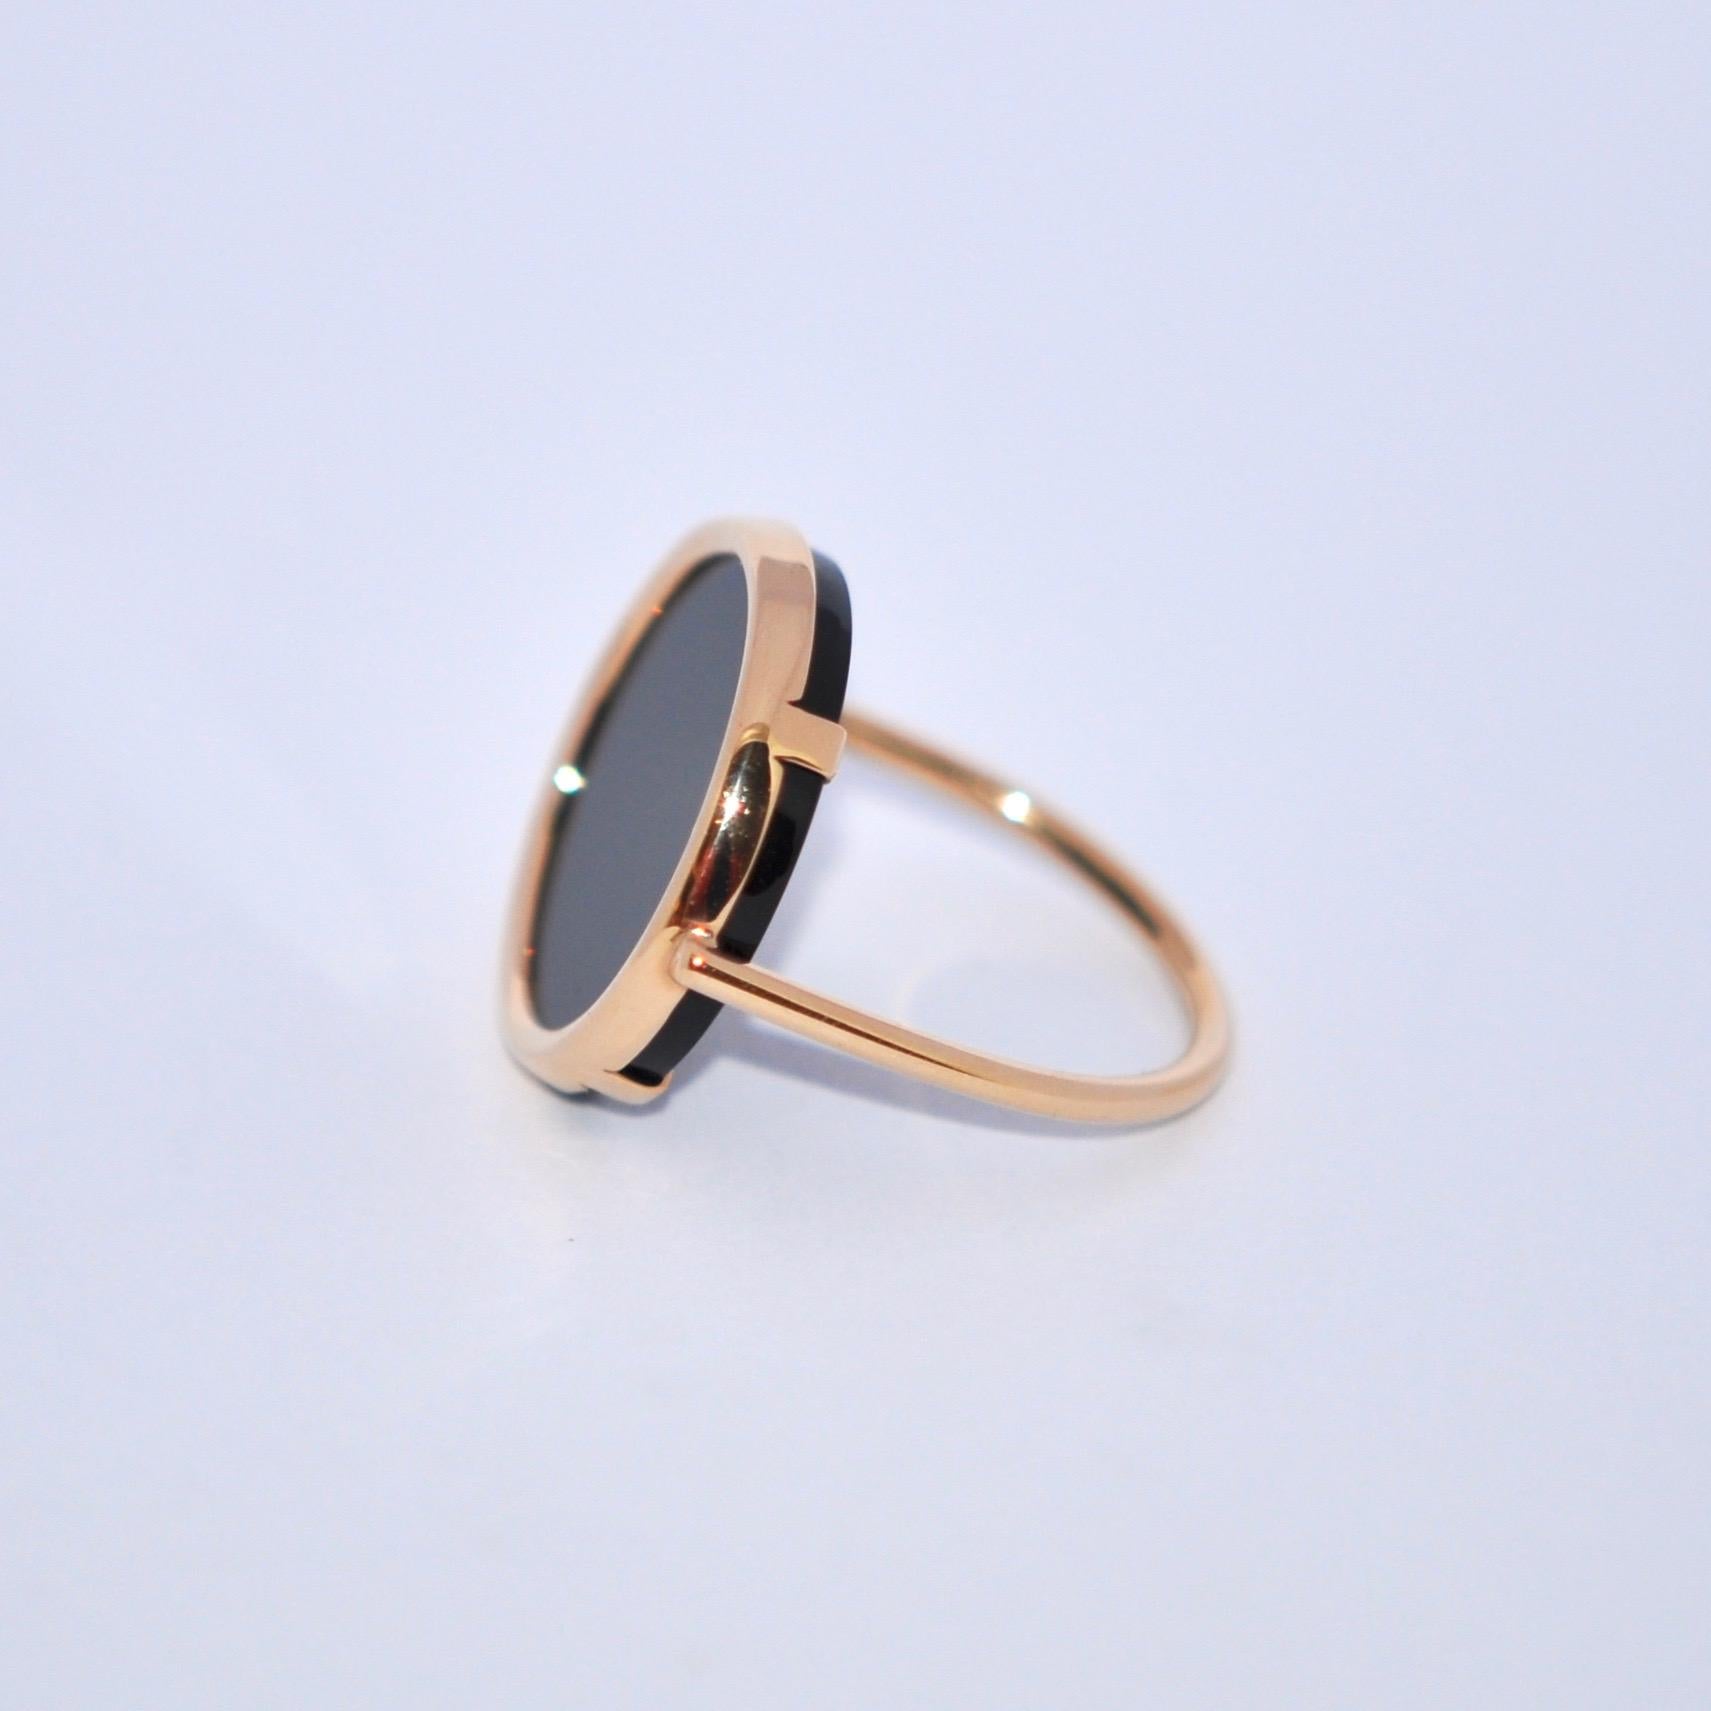 Discover this Onyx and Rose Gold 18 Karat Fashion Ring.
Onyx
Rose Gold 18 Karat
French Size 54 
US Size 7
70's Style 
Colourful and Geometric Lines